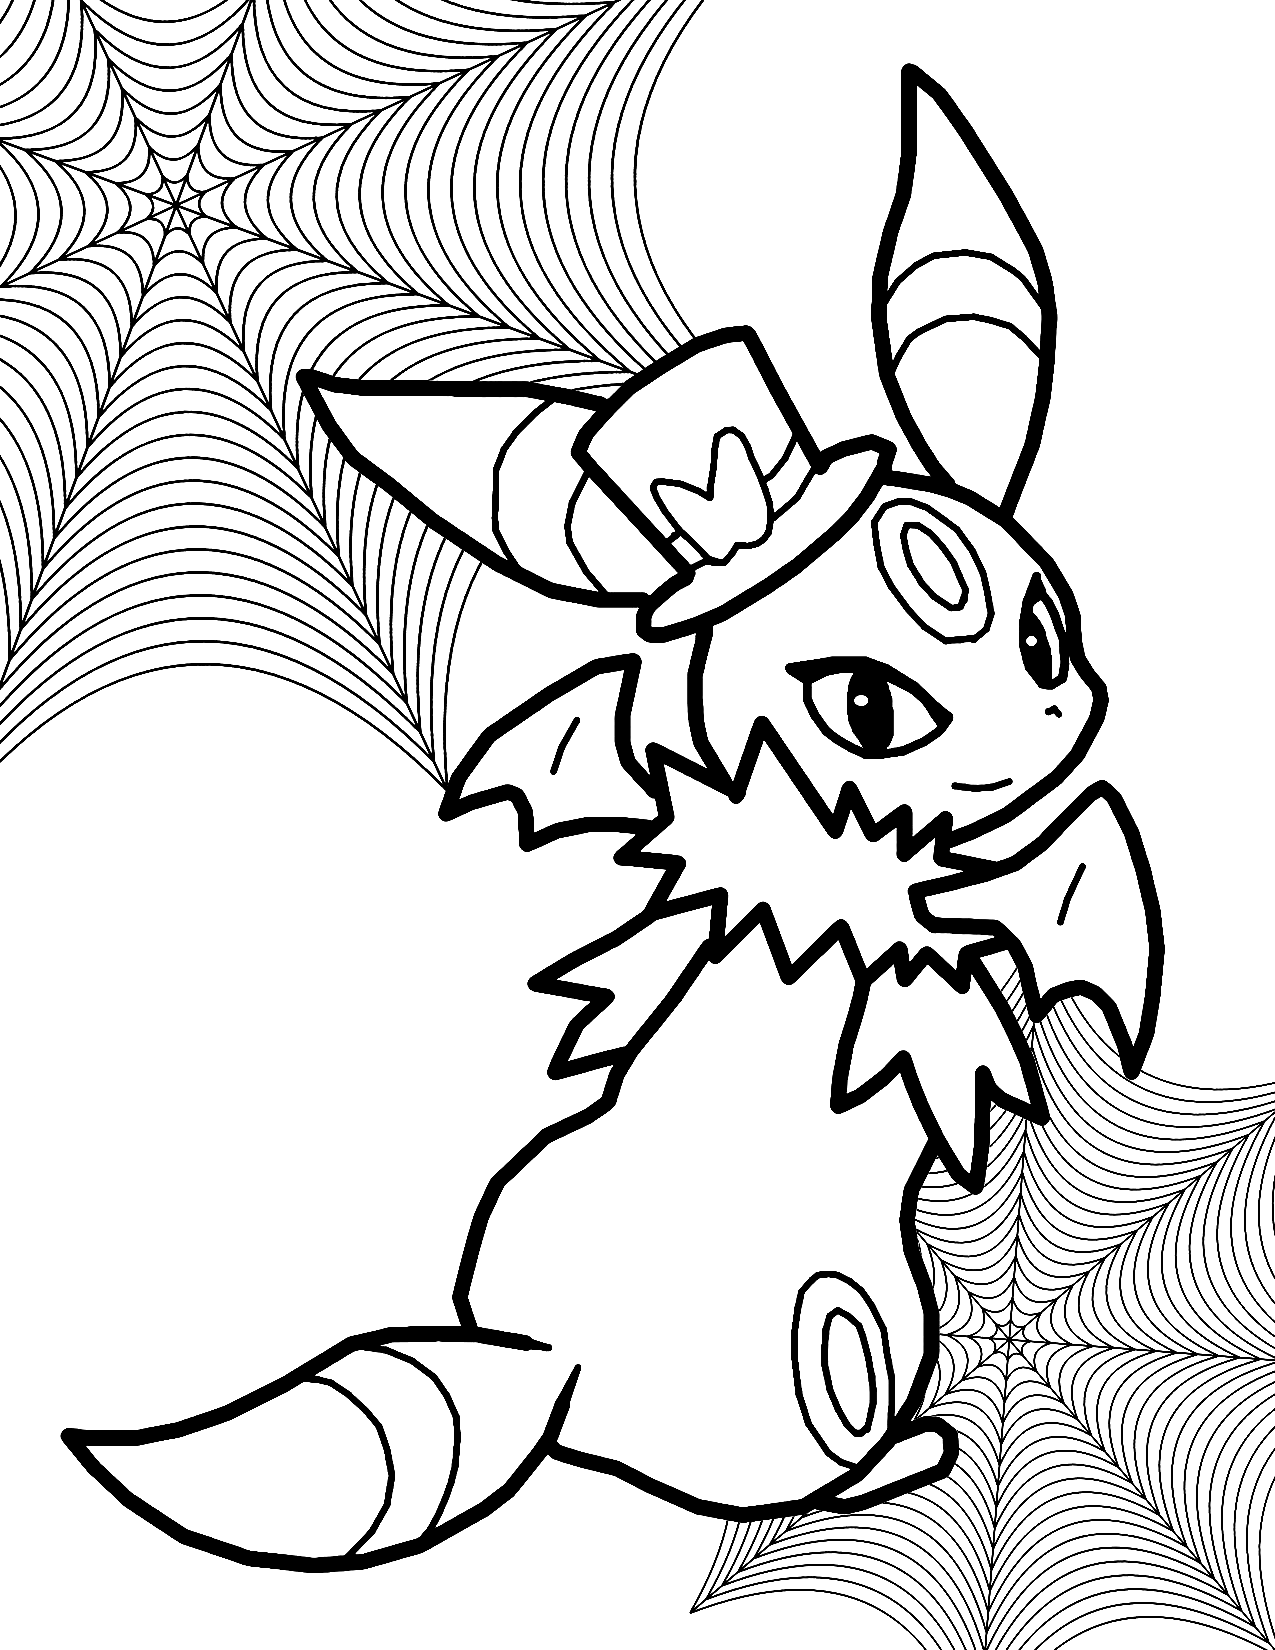 Umbreon Pokemon Halloween Coloring Pages